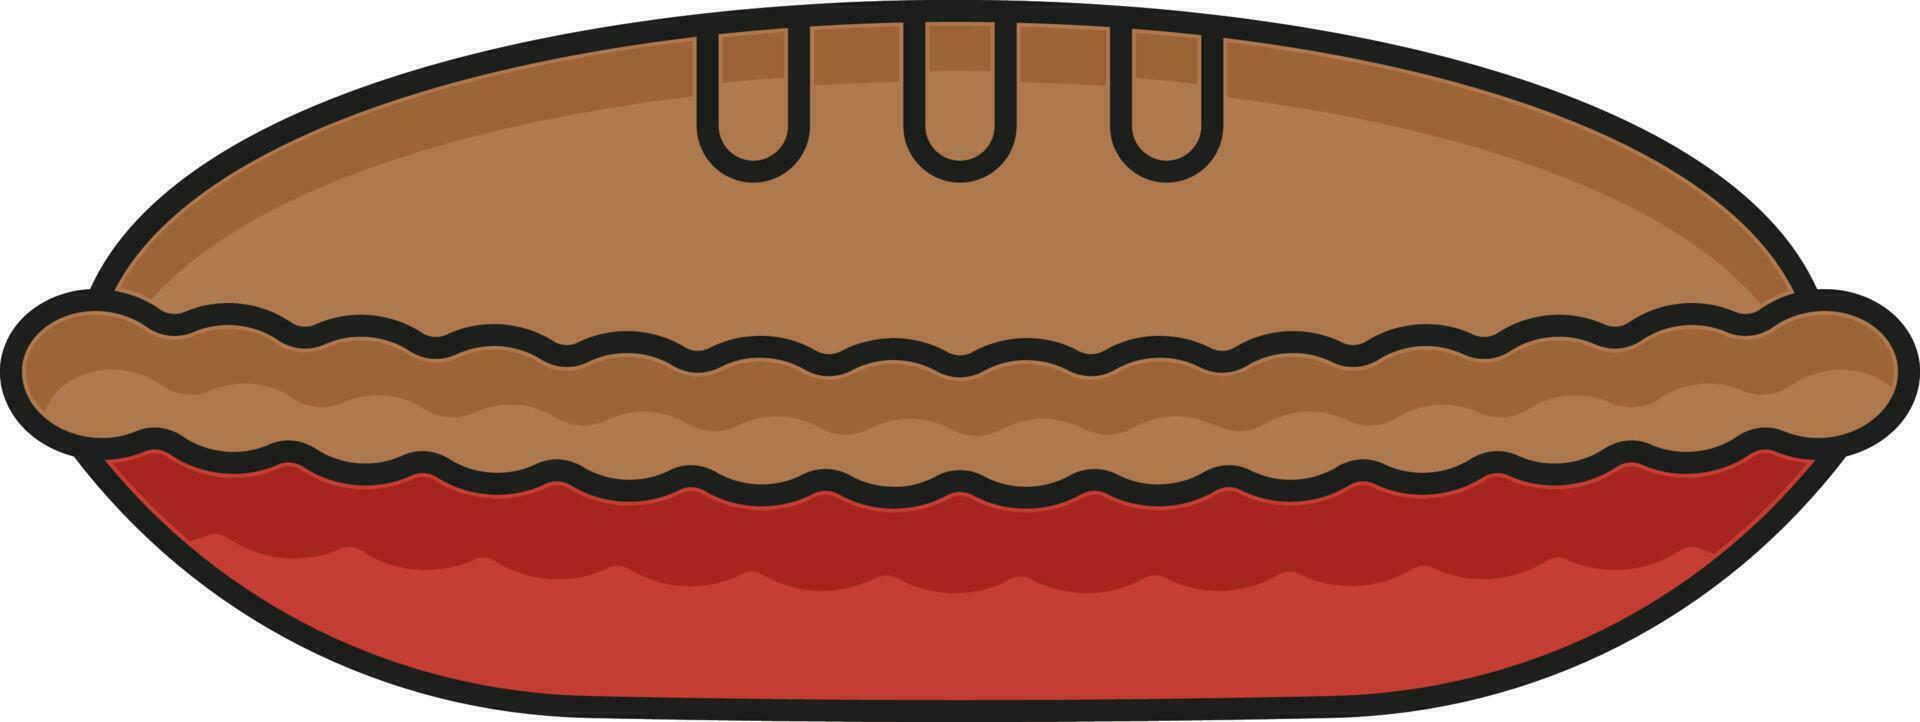 Isolated Pie Cake Icon In Red And Brown Color Flat Style. vector